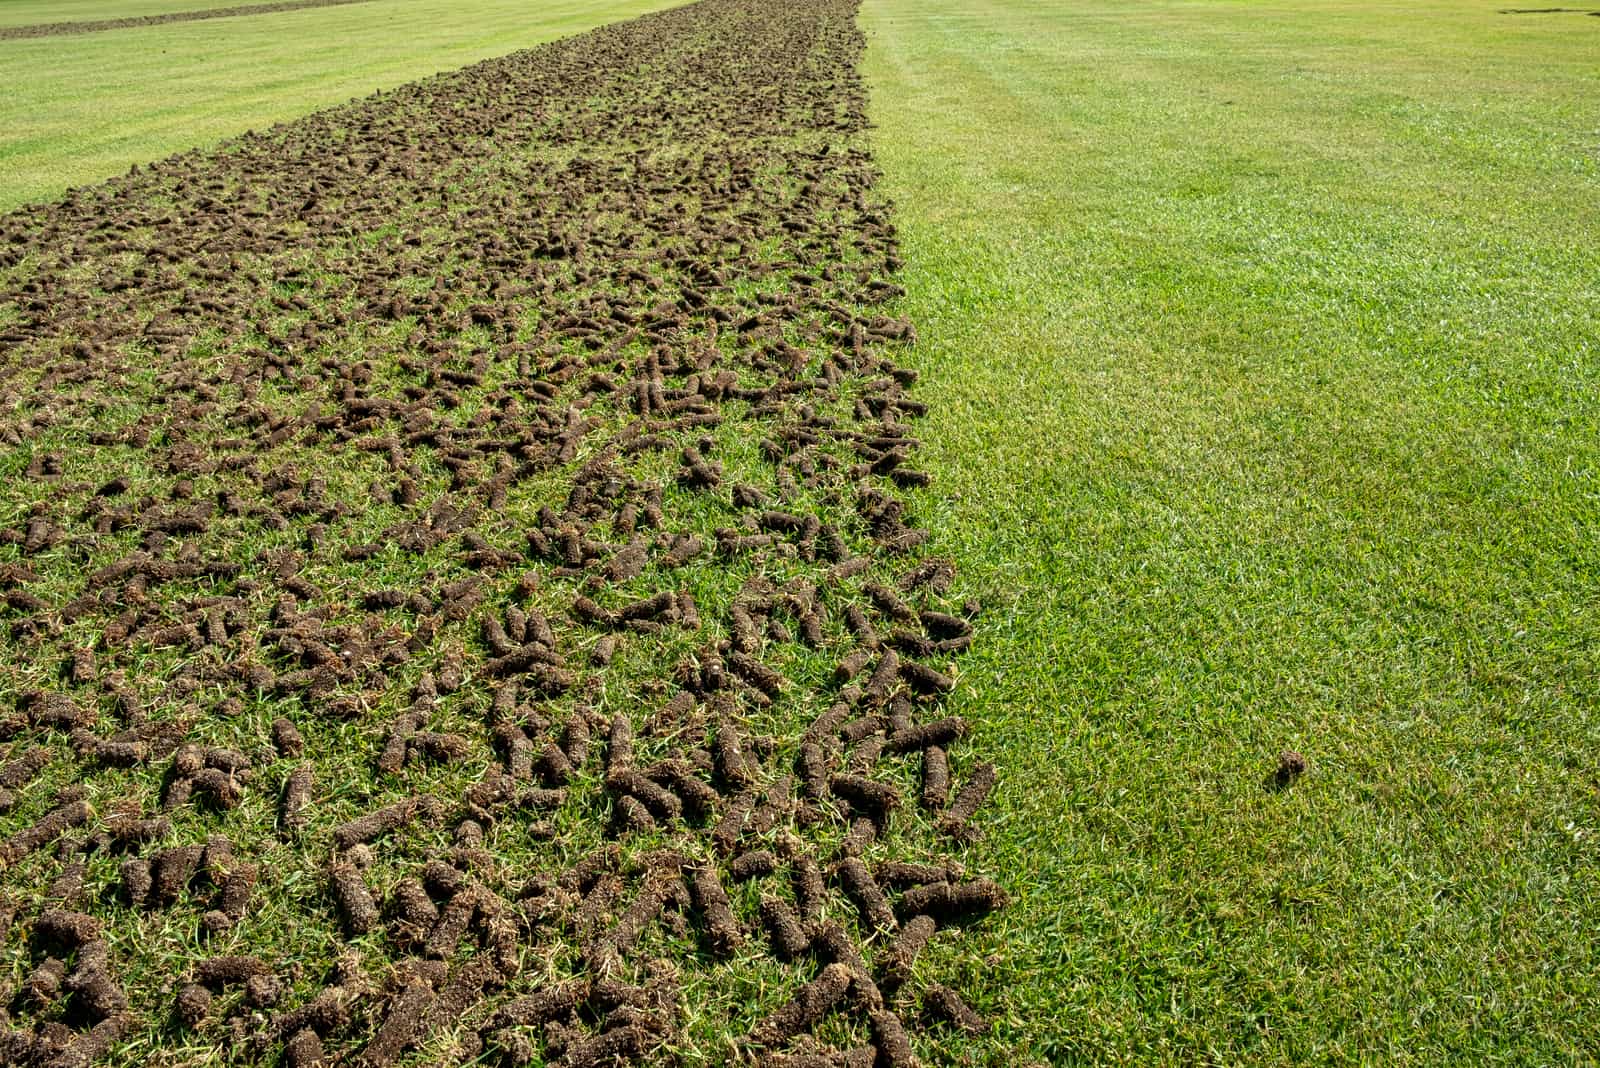 Pile of plugs of soil removed from sports field